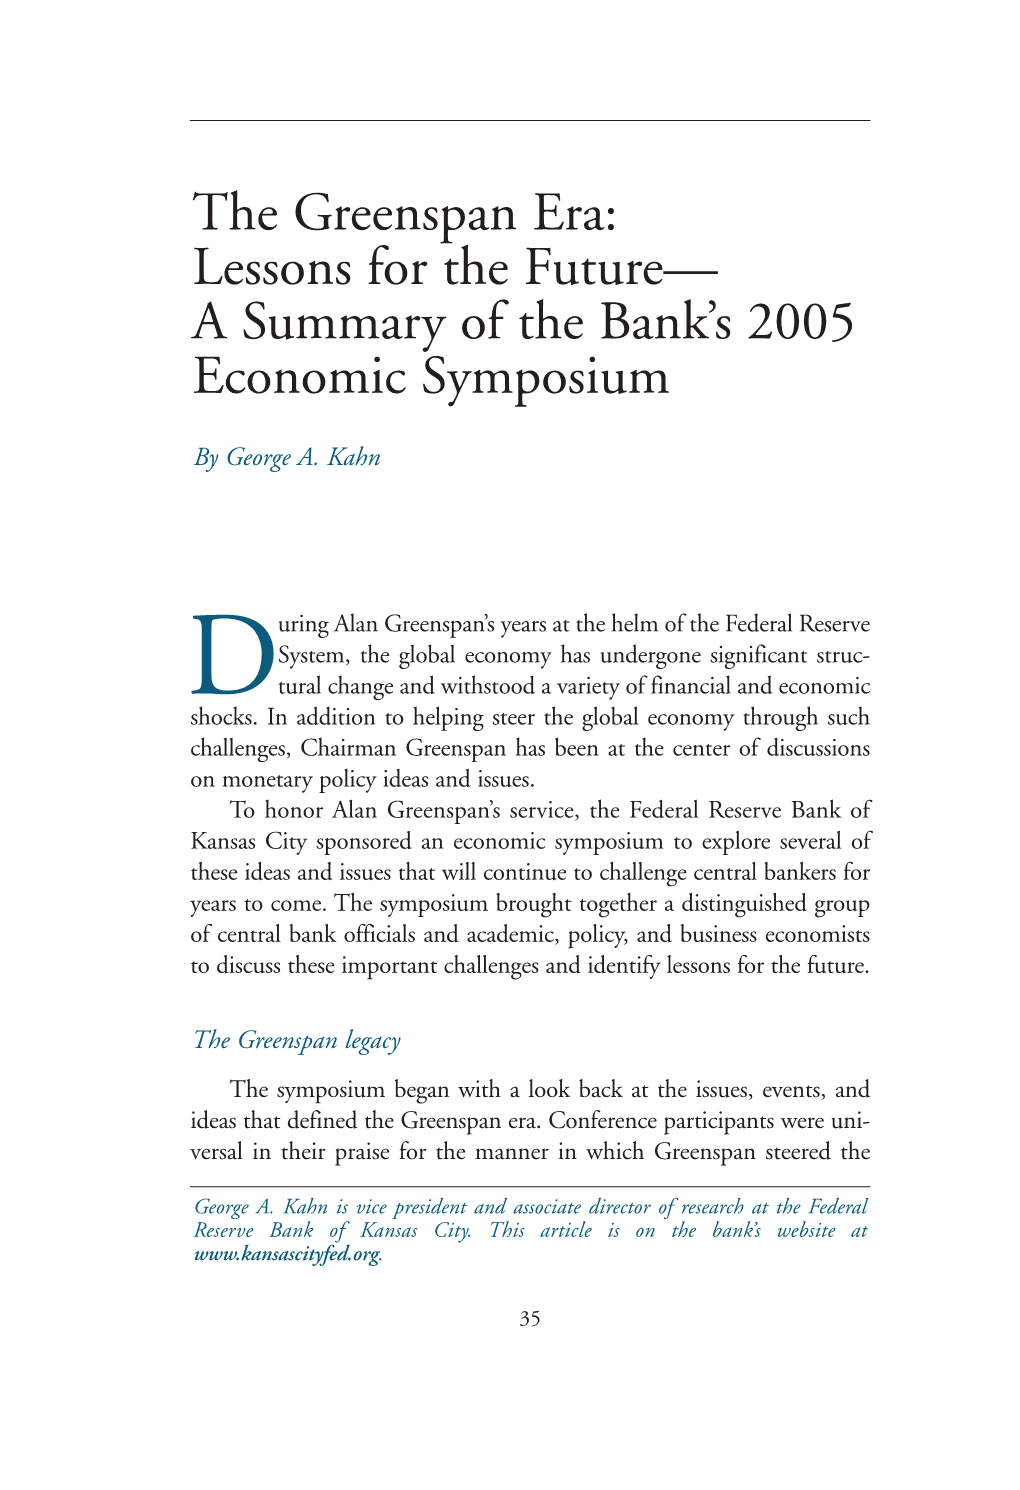 The Greenspan Era: Lessons for the Future— a Summary of the Bank’S 2005 Economic Symposium